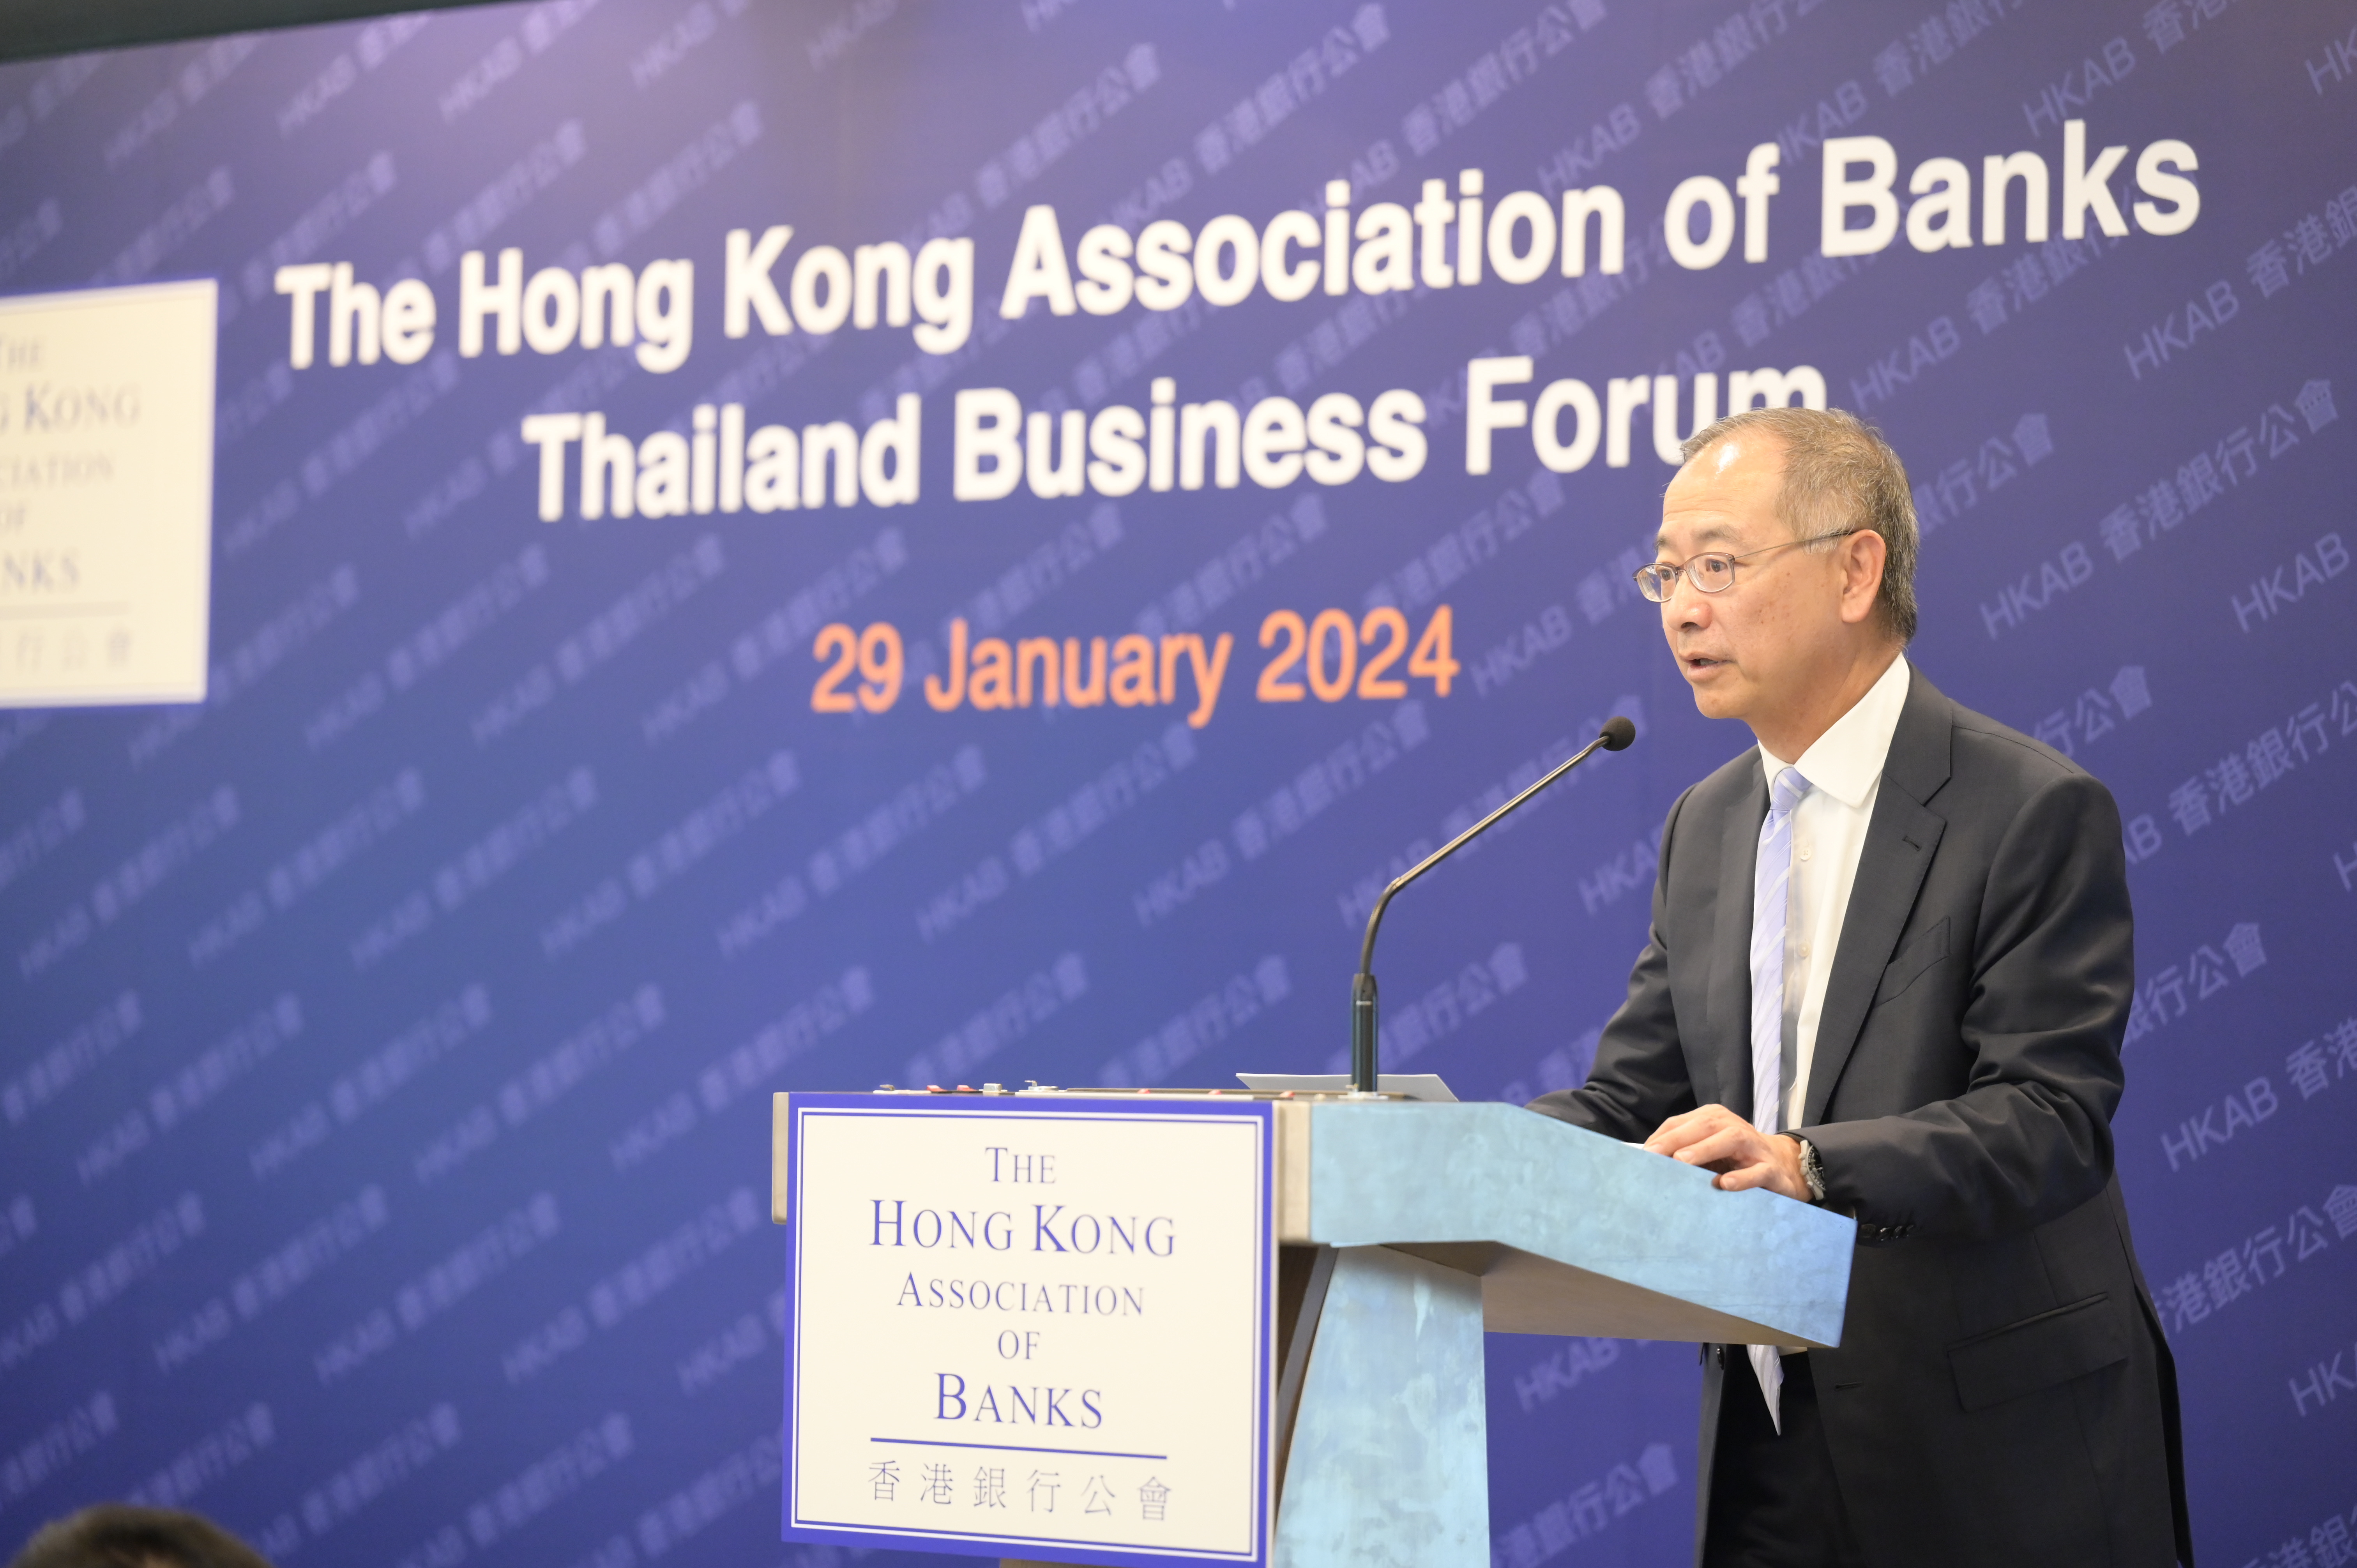 Mr Eddie Yue, Chief Executive of the Hong Kong Monetary Authority, delivers a keynote speech at the Thailand Business Forum in Bangkok on 29 January.